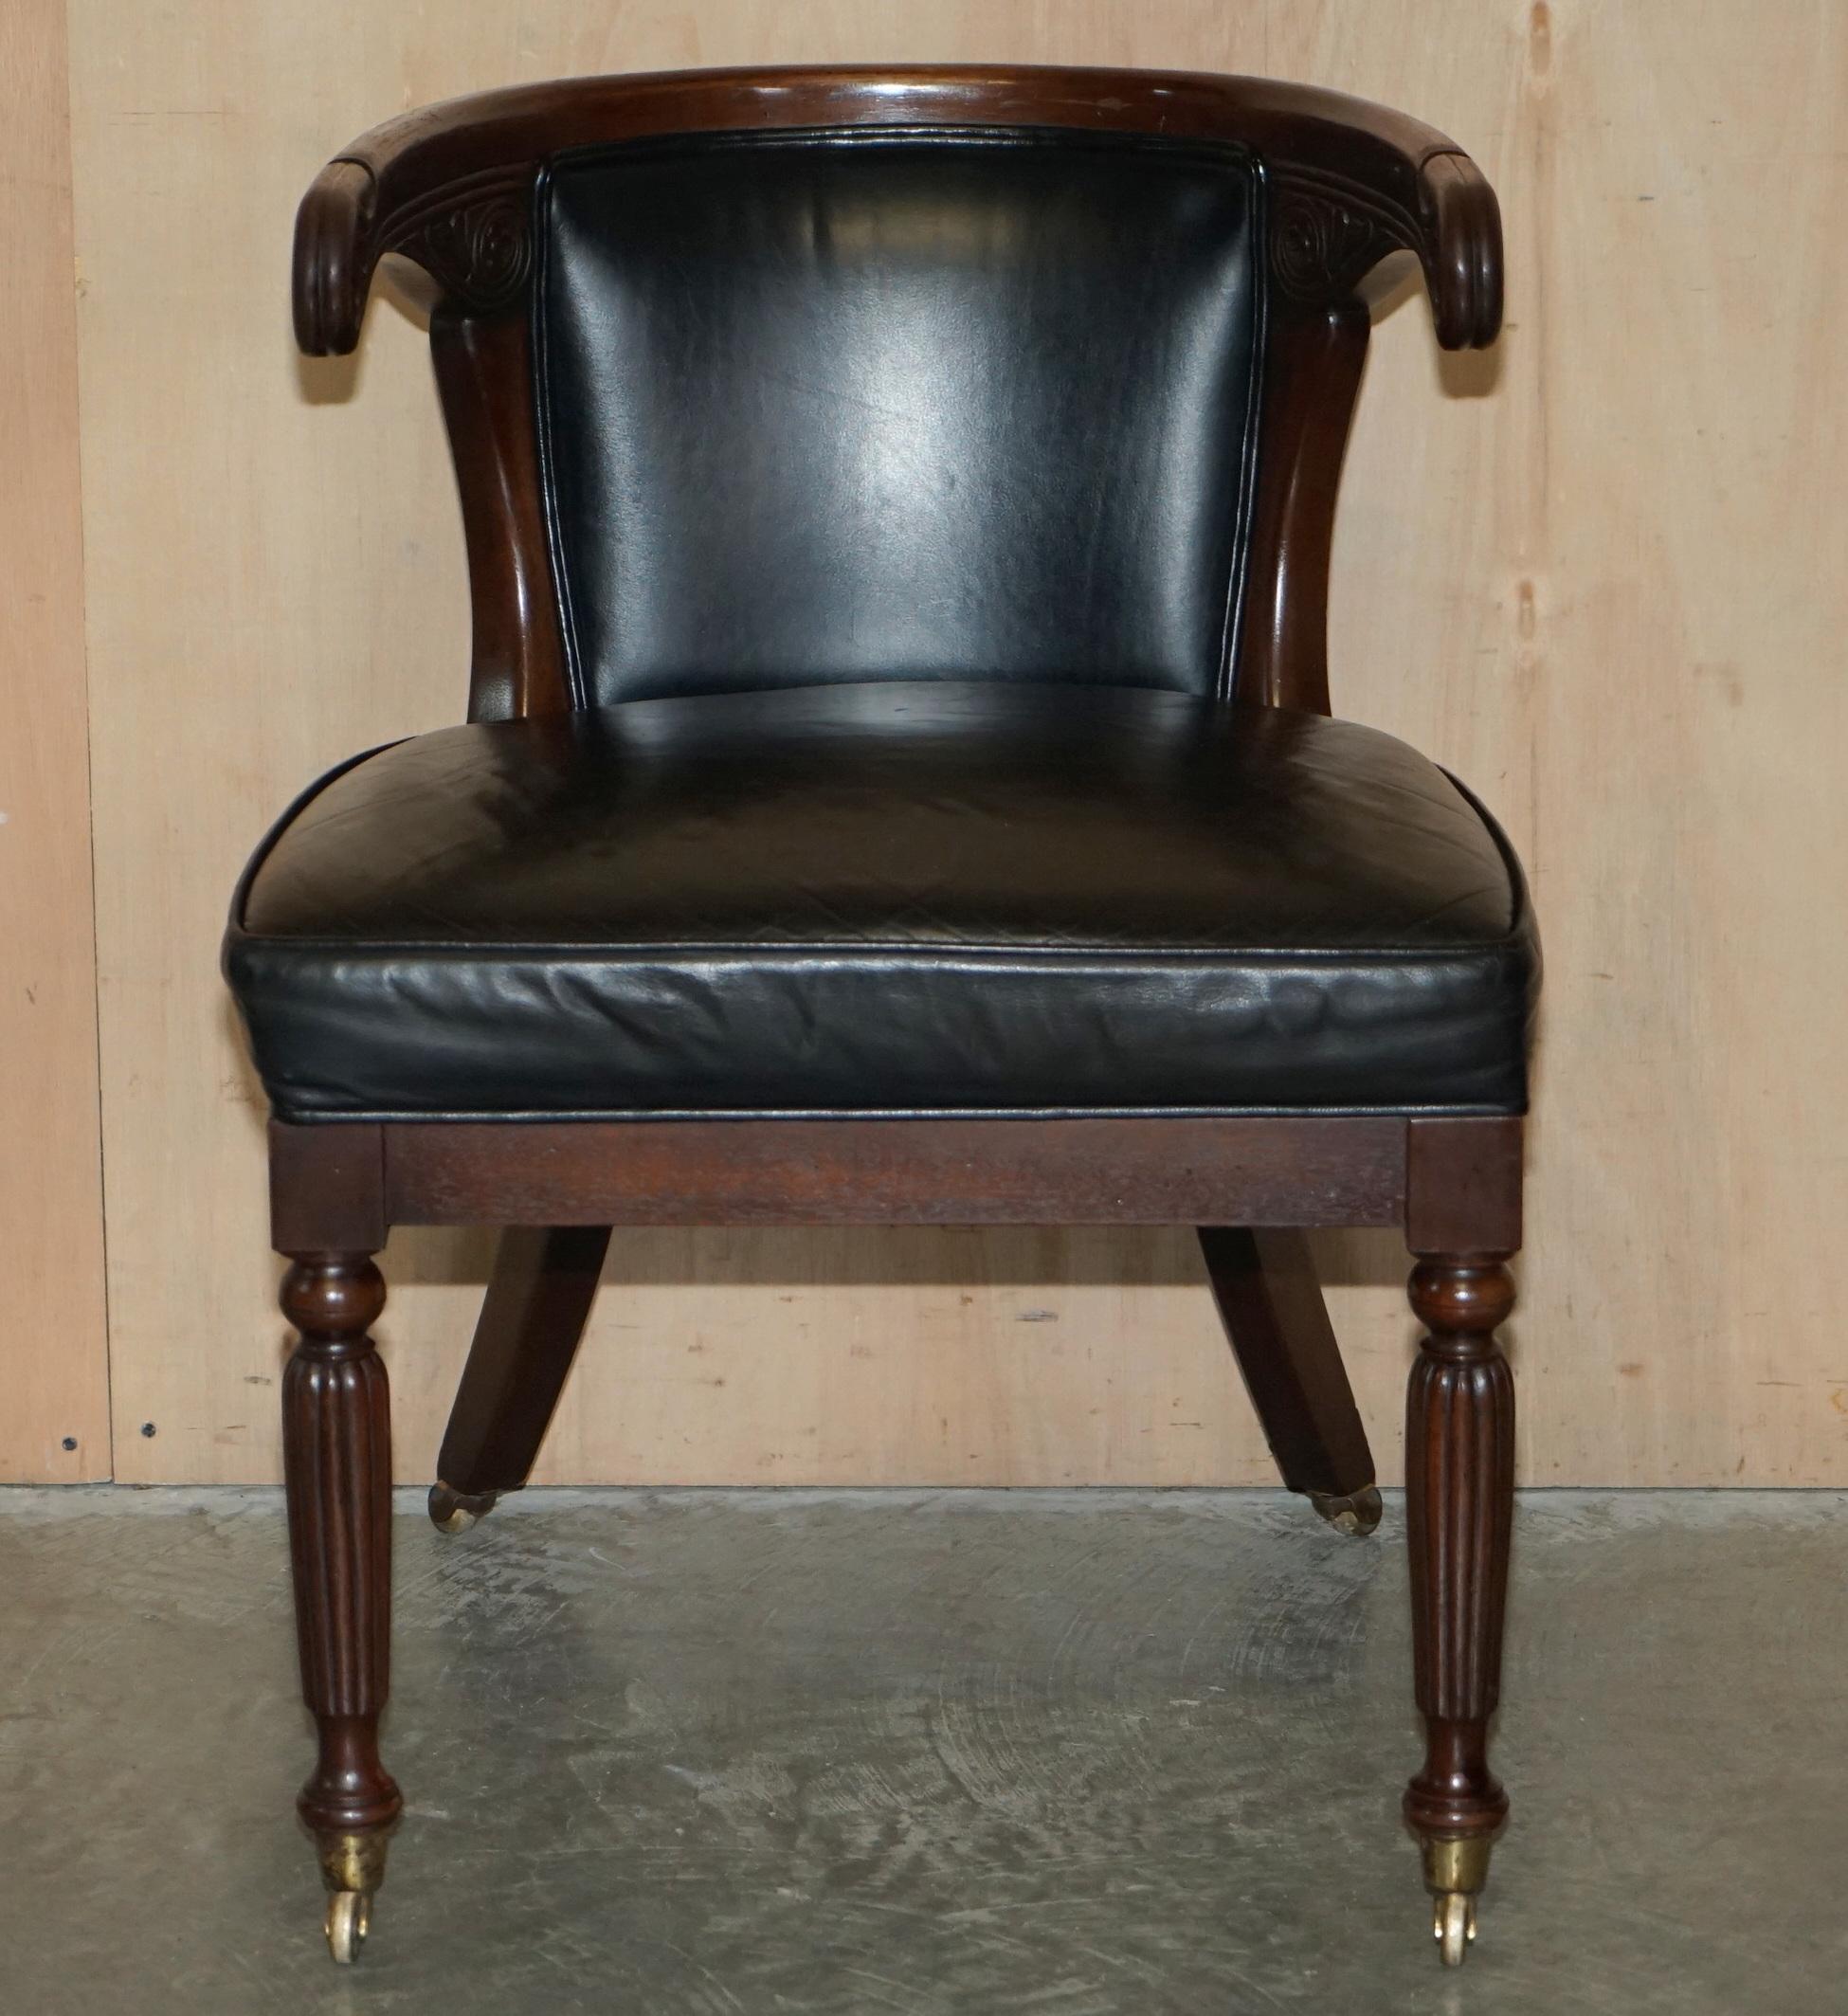 We are delighted to offer for sale this exquisite original circa 1815 Black leather Regency office chair with sculpted Horseshoe frame

What a chair! I have never seen another like it, the frame is traditional Regency and looks important and